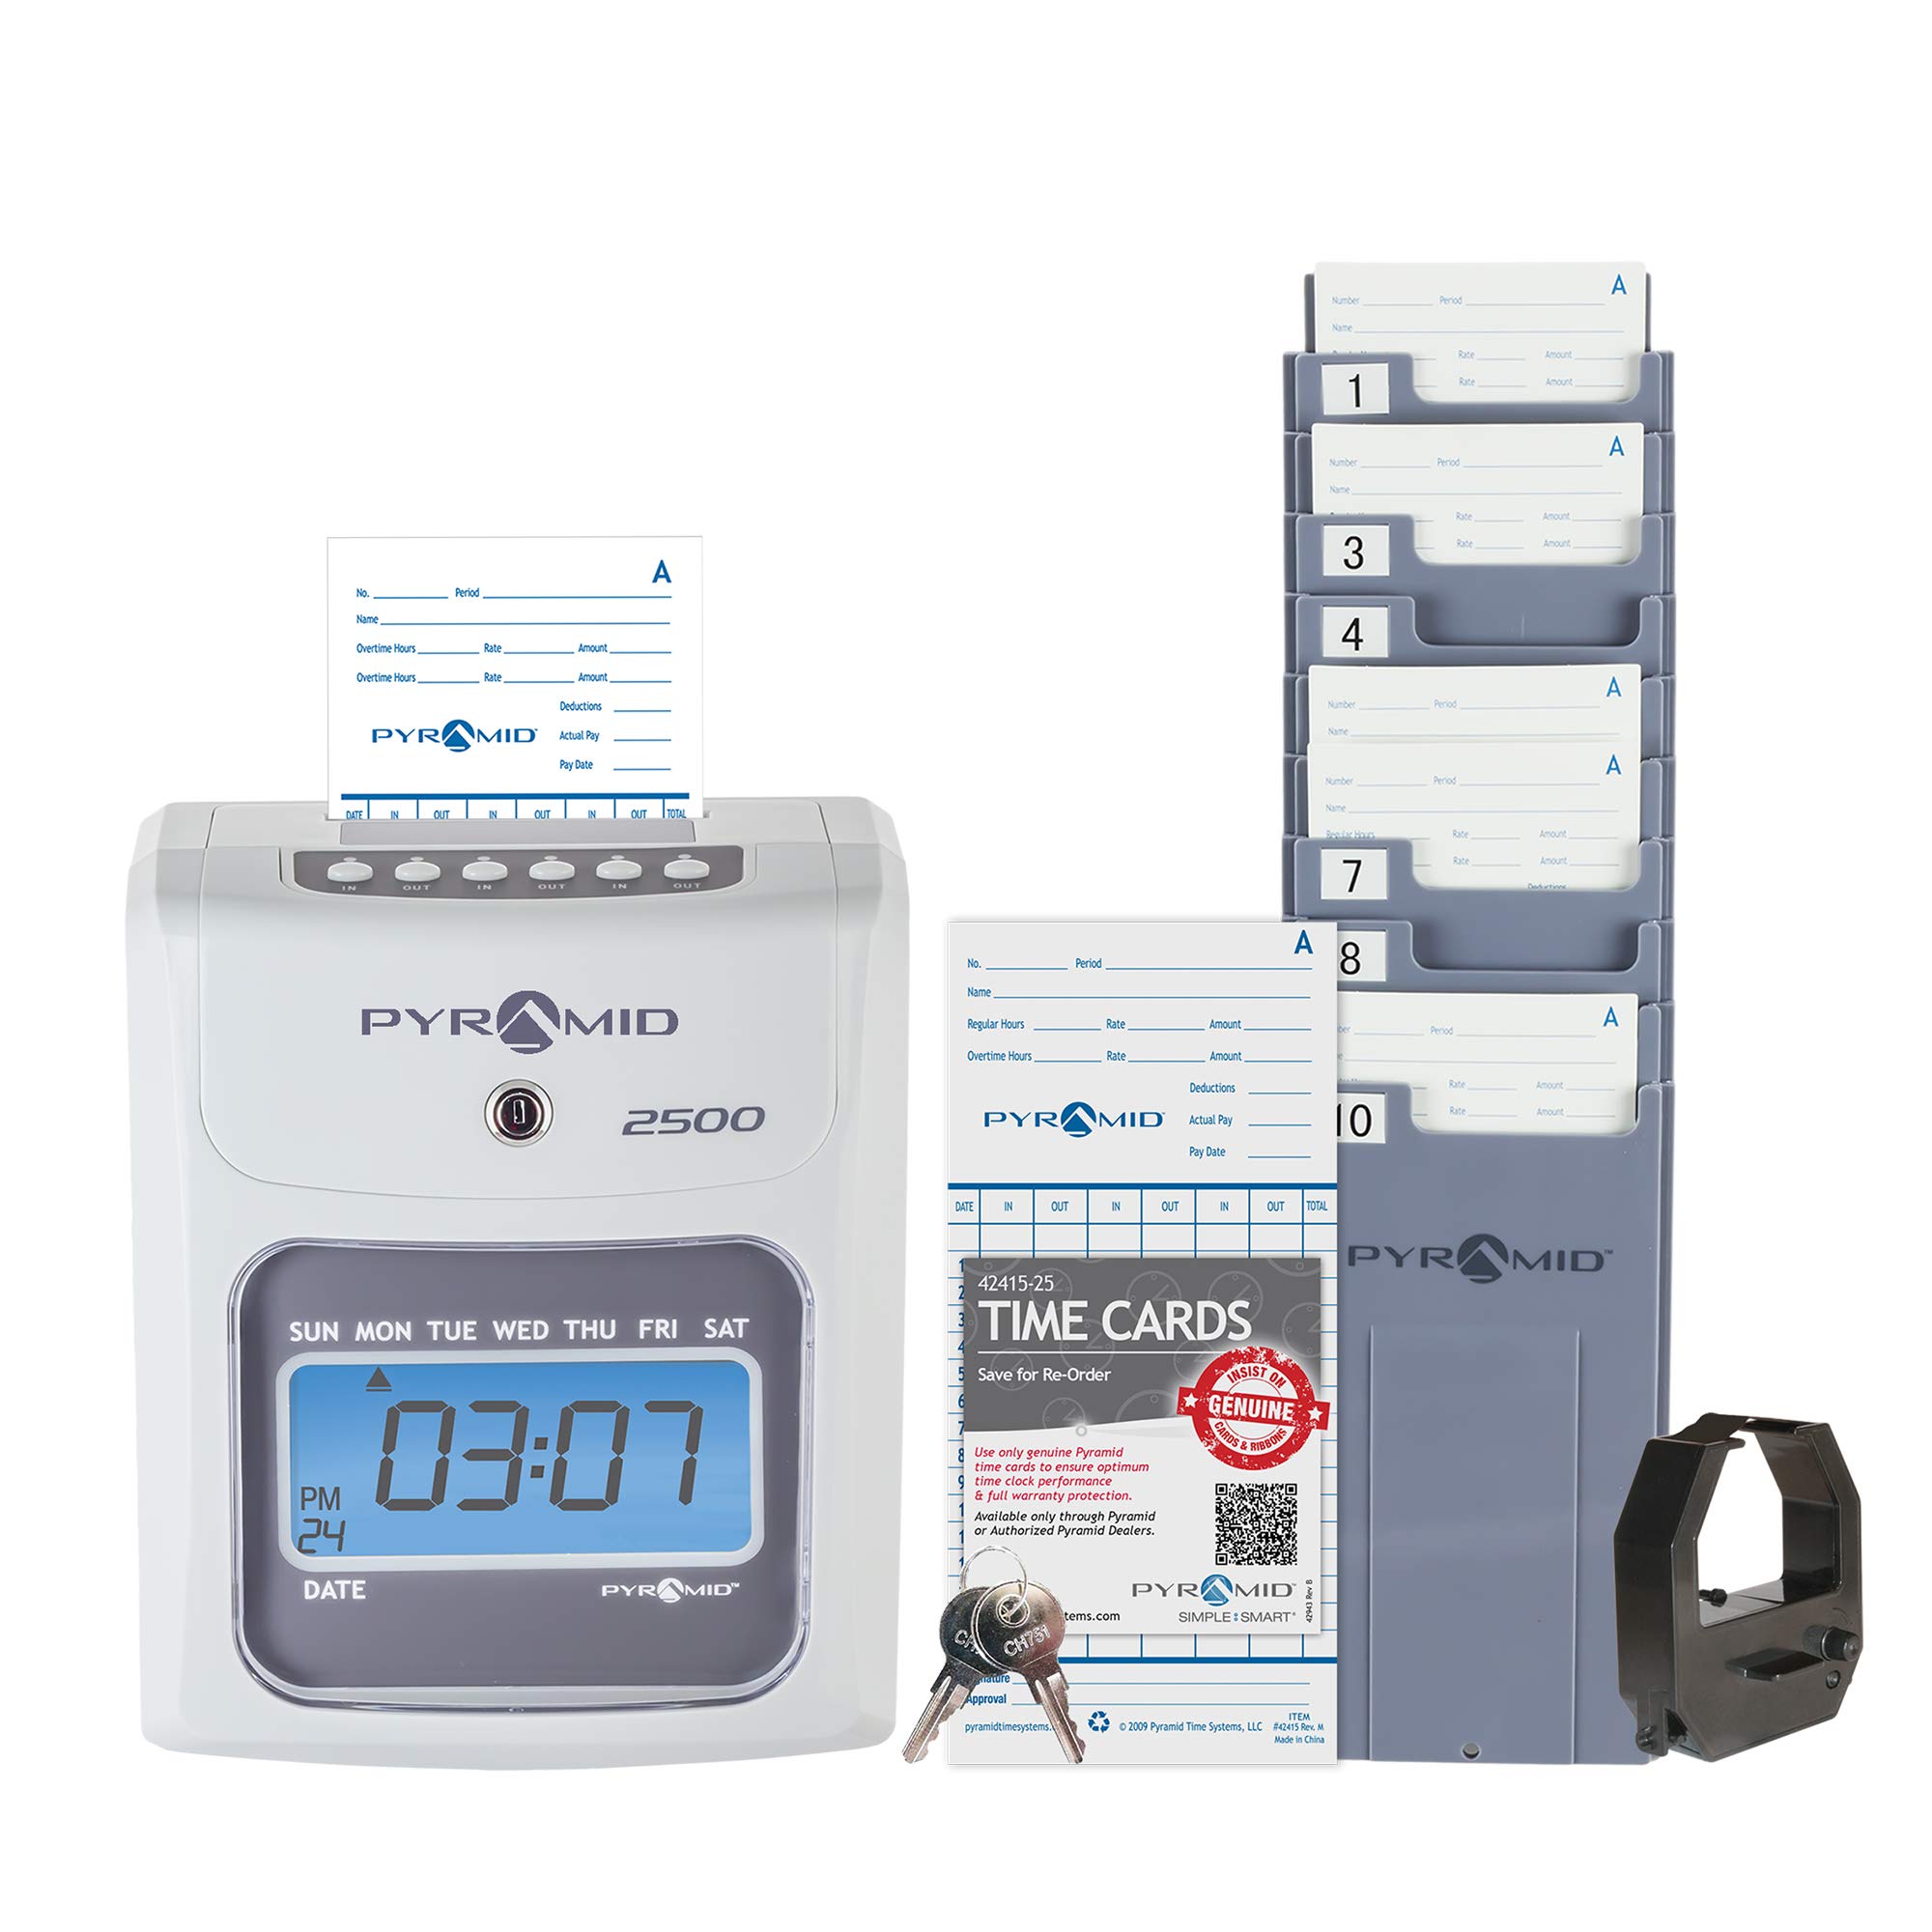 Pyramid Time Systems 2500 Small Business Time Clock Bundle with 100 Time Cards, 1 Ribbon, 1 Time Card Rack, 2 Security Keys - No Employee Limit, ivory